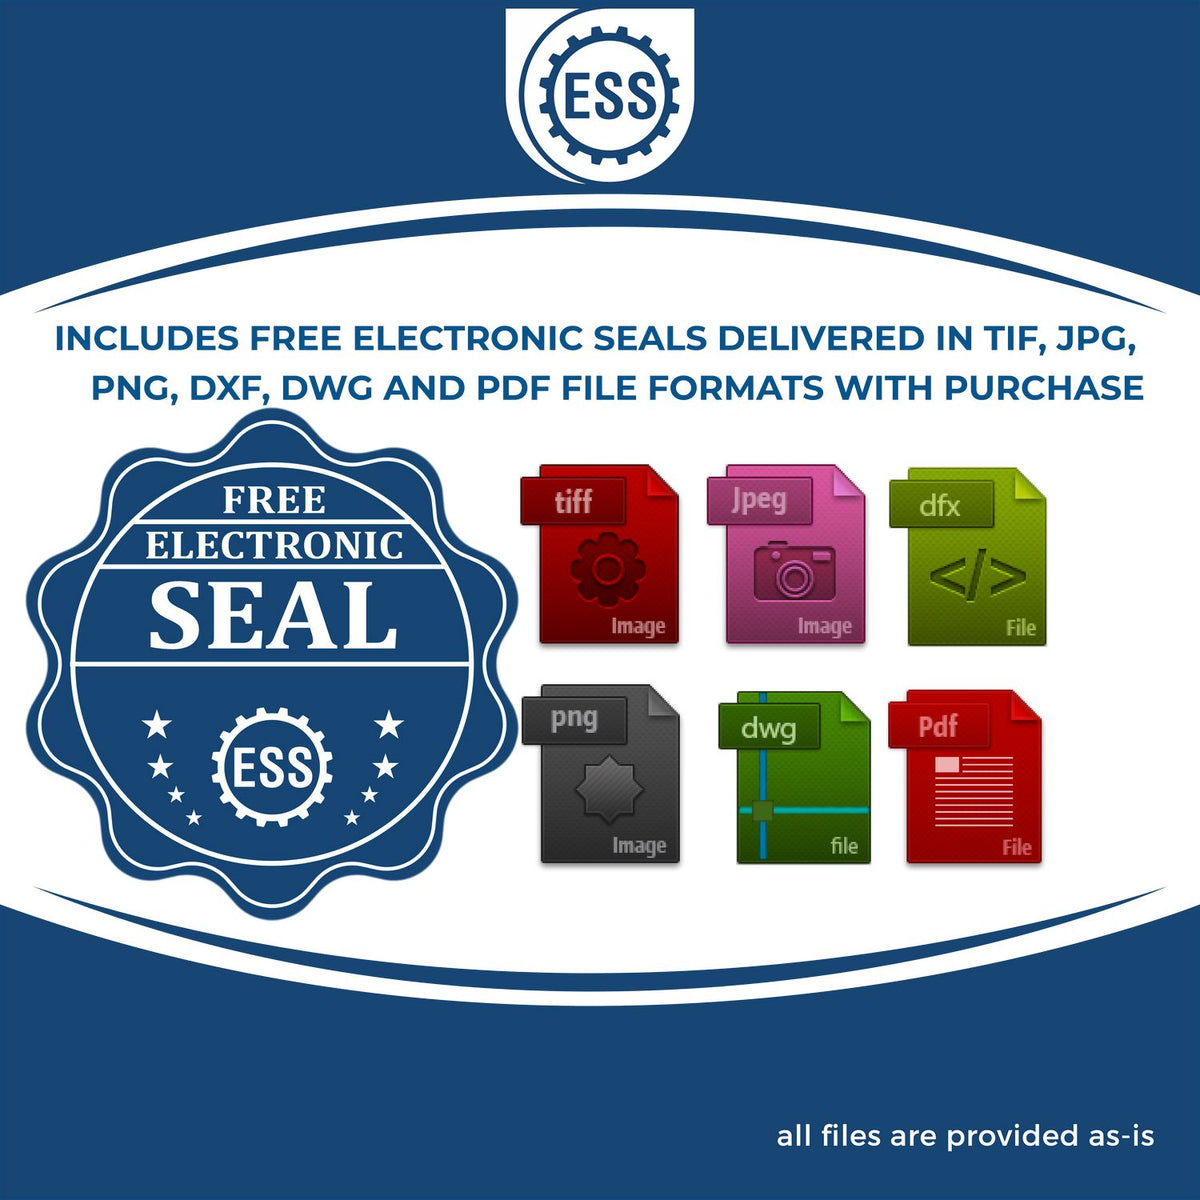 An infographic for the free electronic seal for the Handheld Maine Professional Geologist Embosser illustrating the different file type icons such as DXF, DWG, TIF, JPG and PNG.